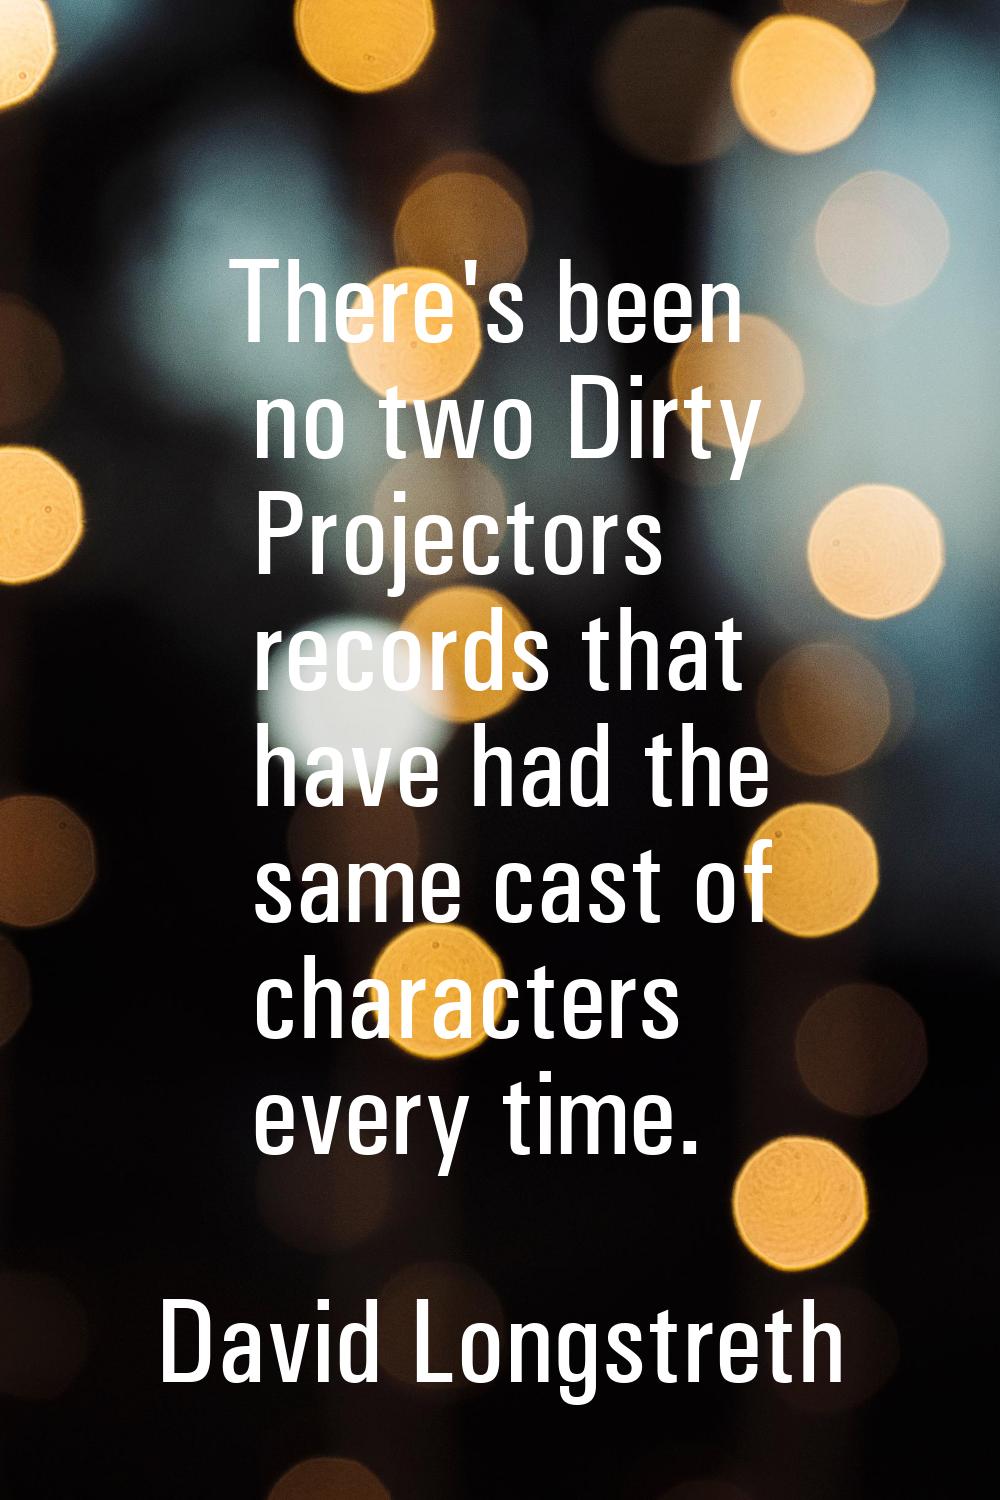 There's been no two Dirty Projectors records that have had the same cast of characters every time.